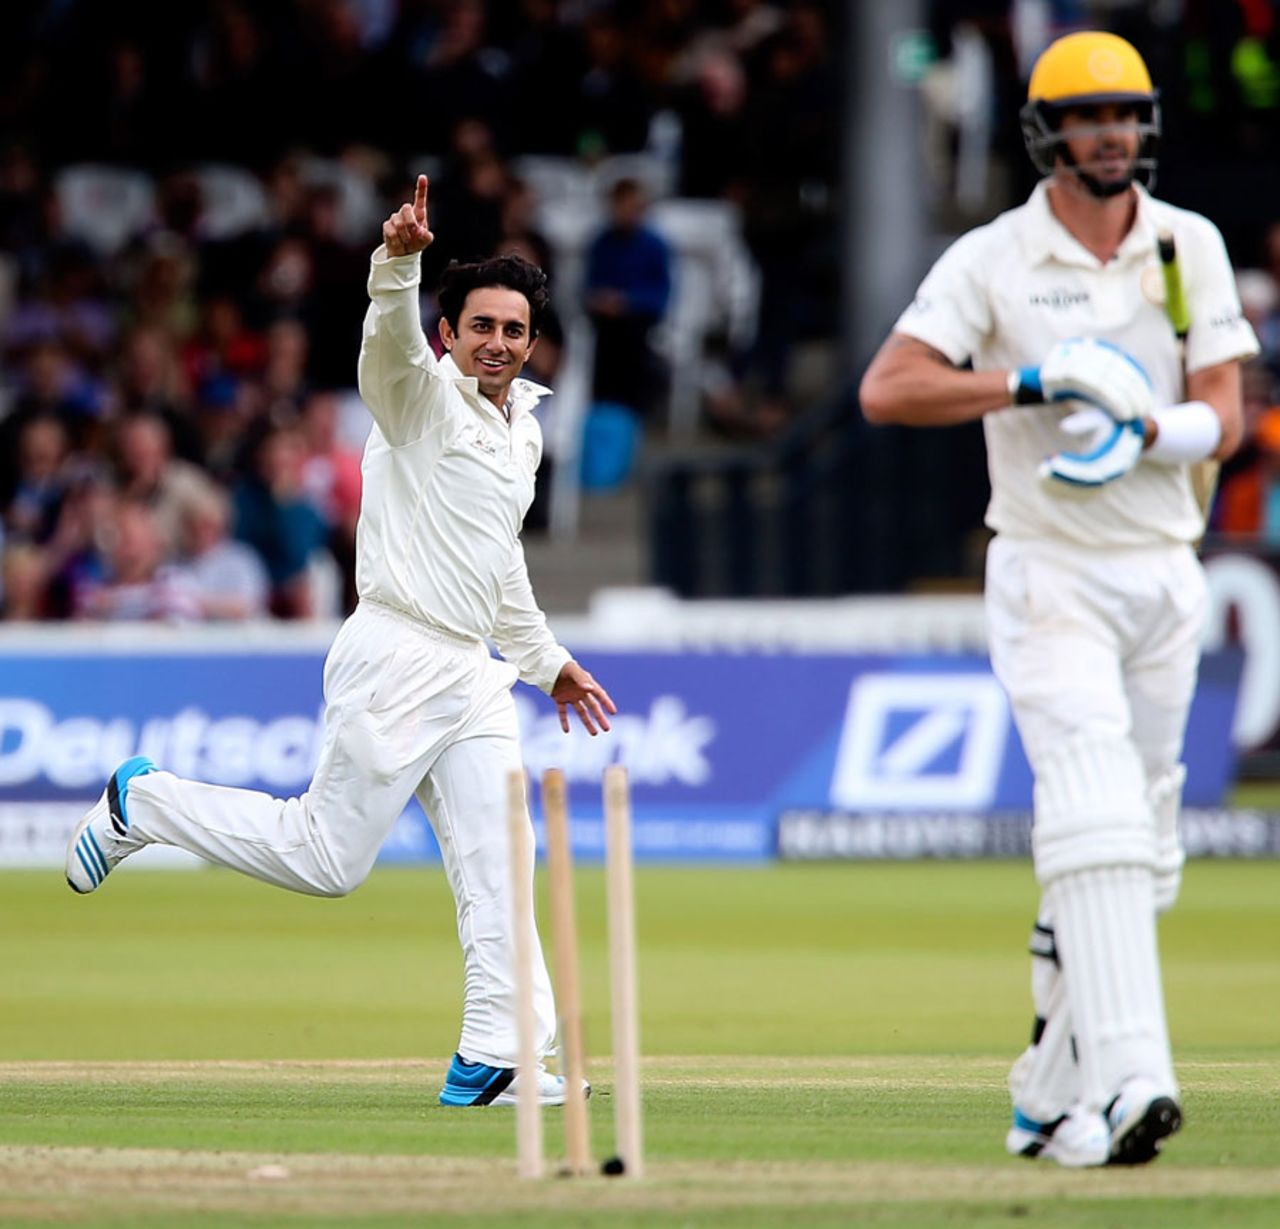 Saeed Ajmal dismissed Kevin Pietersen and Shahid Afridi within three balls, MCC v Rest of the World XI, Lord's, July 5, 2014